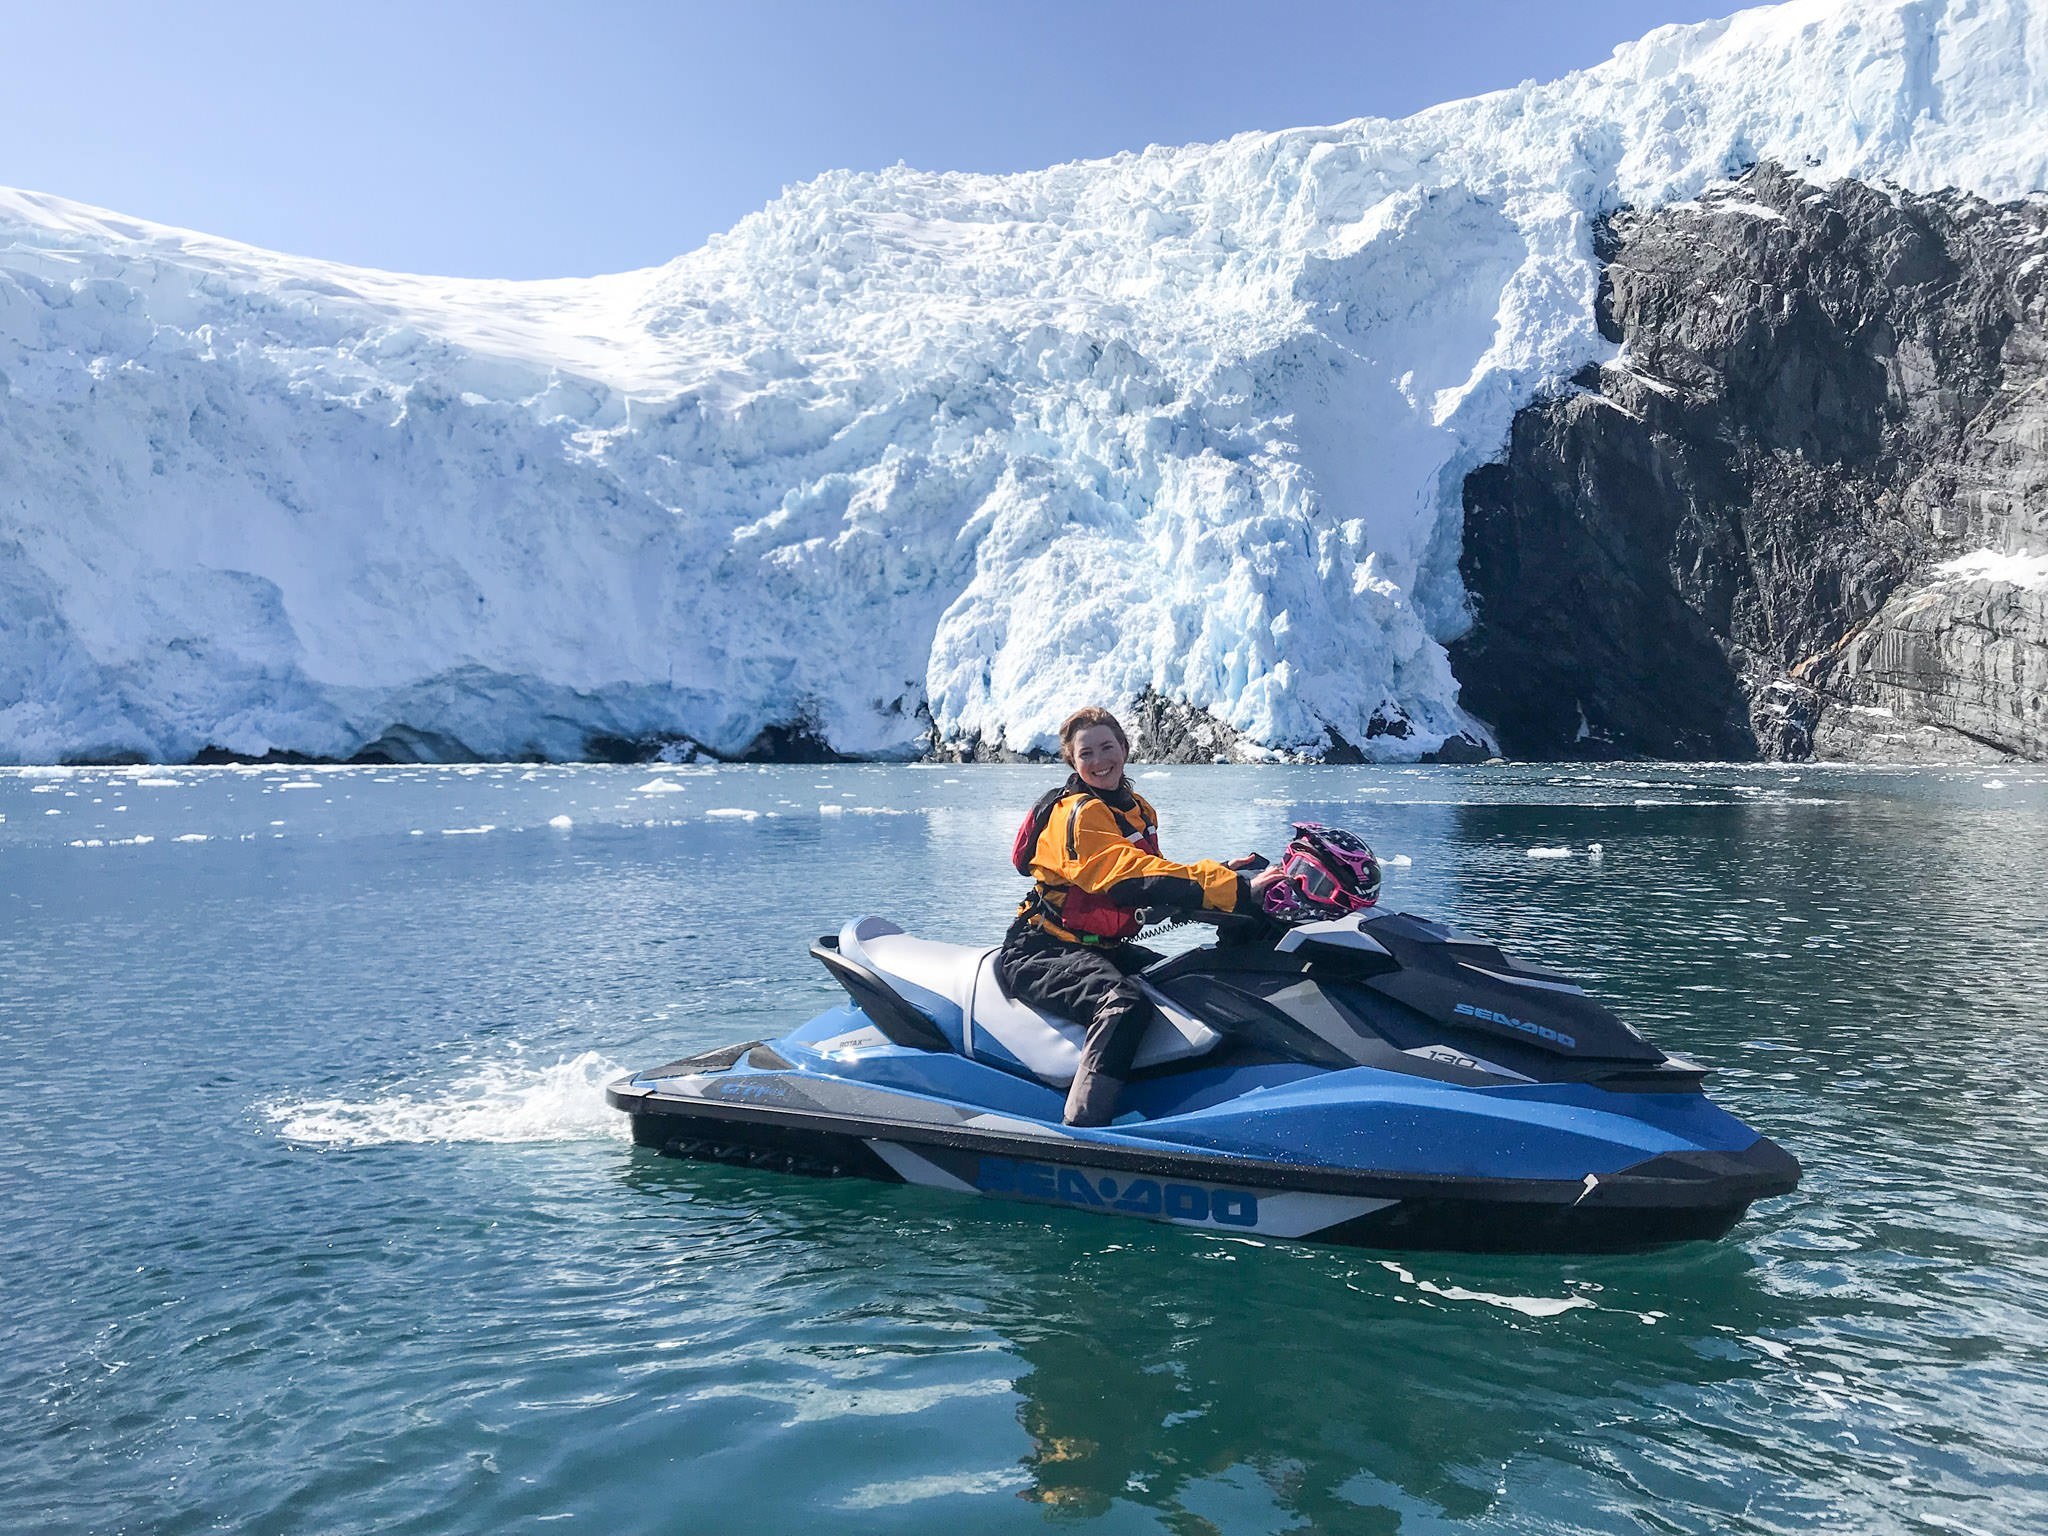 A smiling woman on a jet ski in front of a glacier.